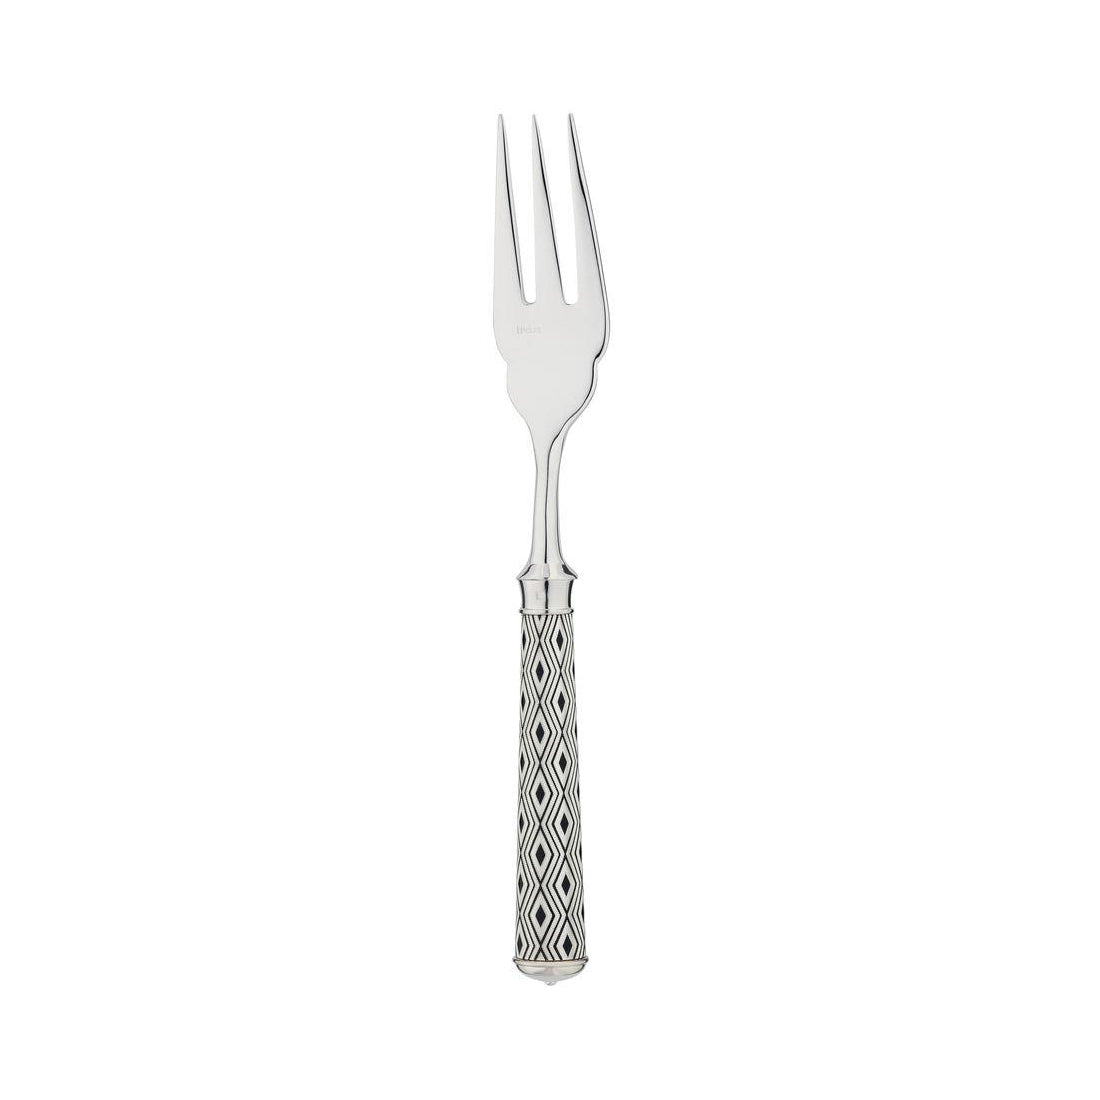 ARLEQUIN FISH FORK STERLING SILVER SILVER PLATED